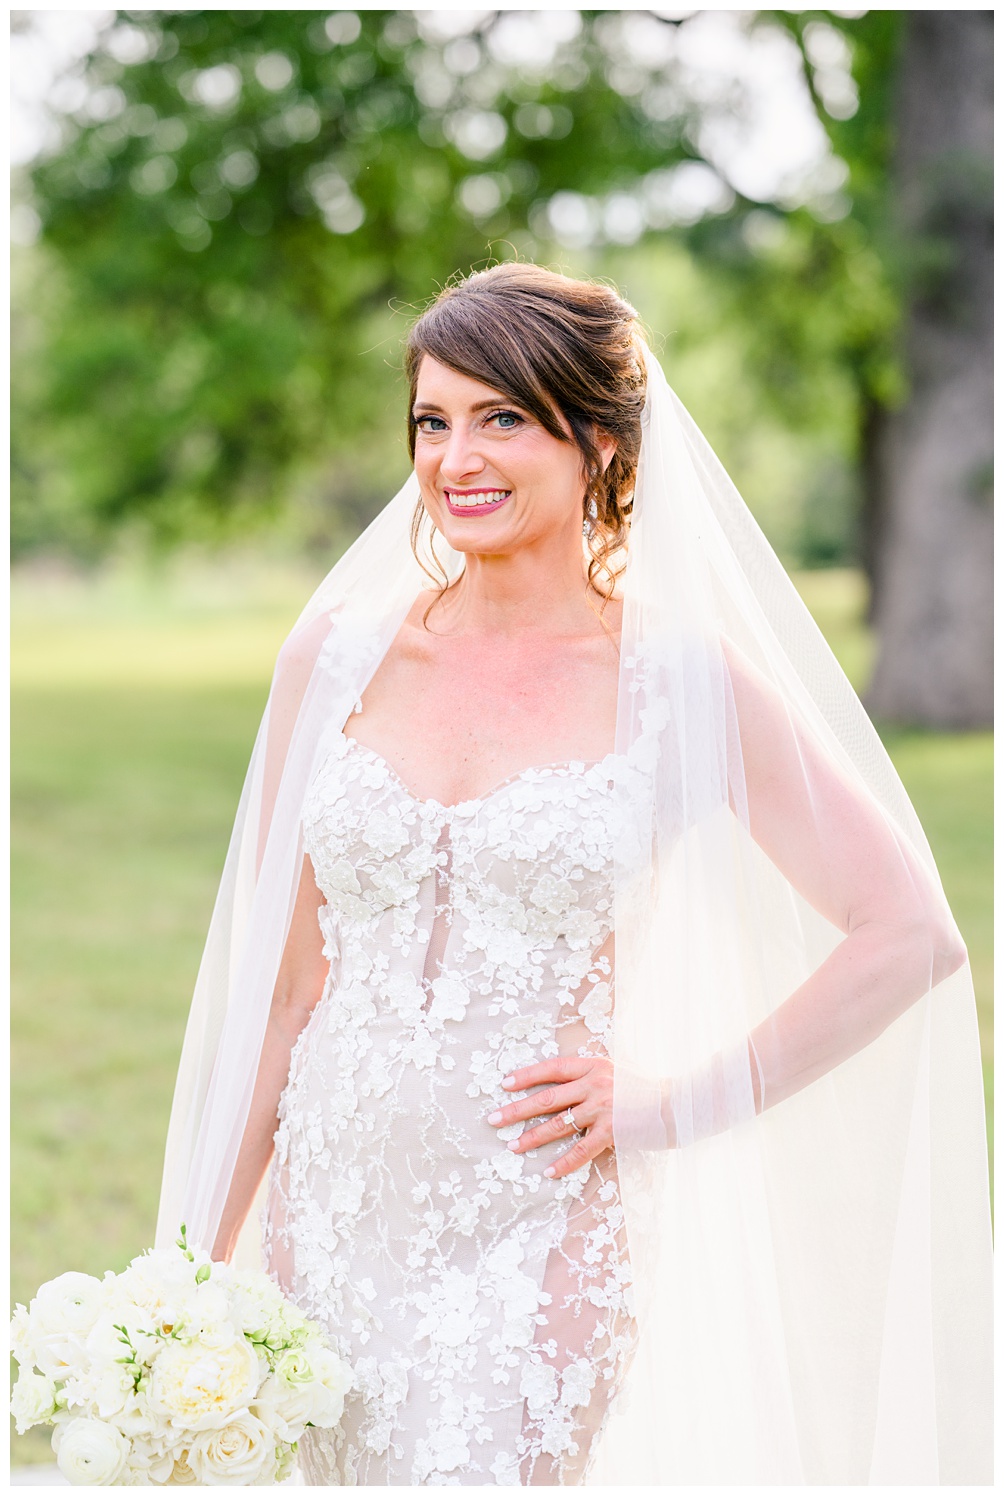 Lux Bridal Beauty hair and makeup services in Austin Texas